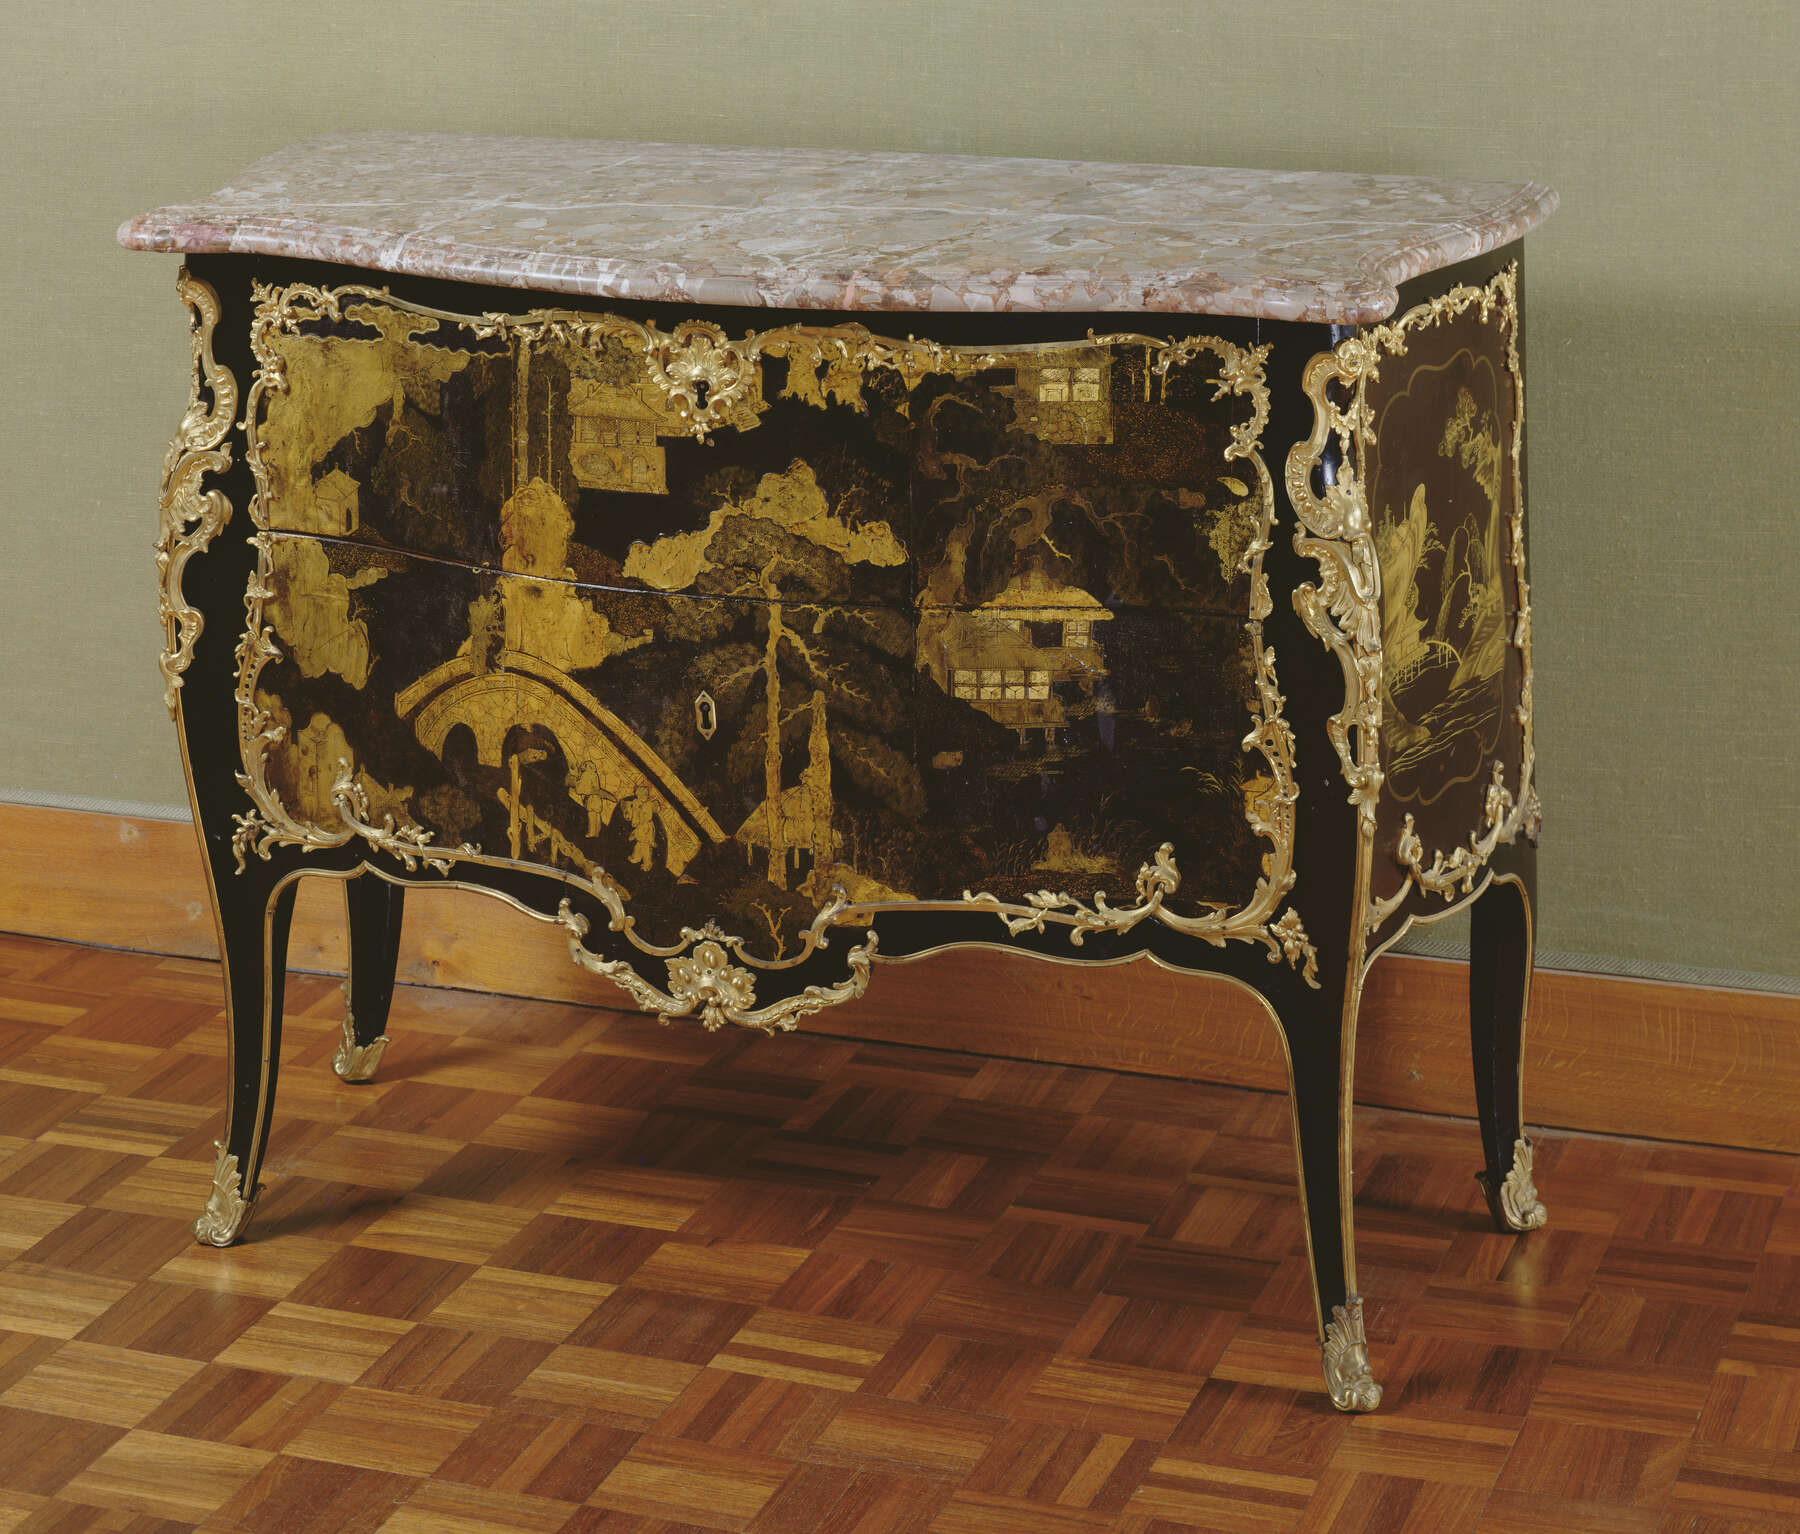 three-quarter view of a black commode decorated with gilt bronze mounts, lacquer designs with gold, and a light pink and white speckled marble top